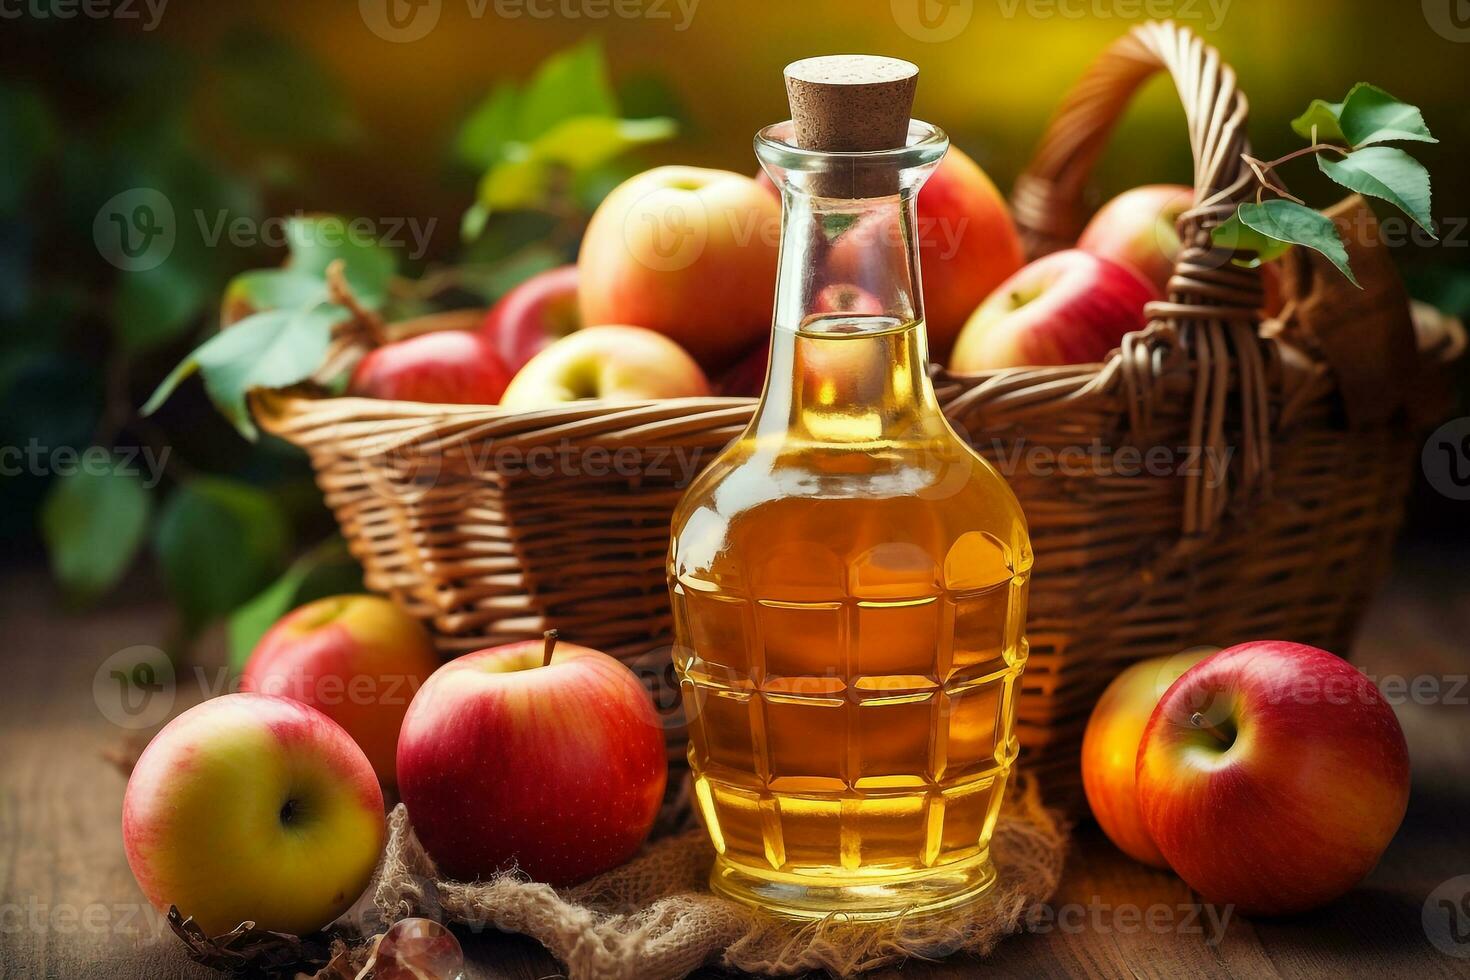 Apple cider in a glass jug and a basket of fresh apples photo